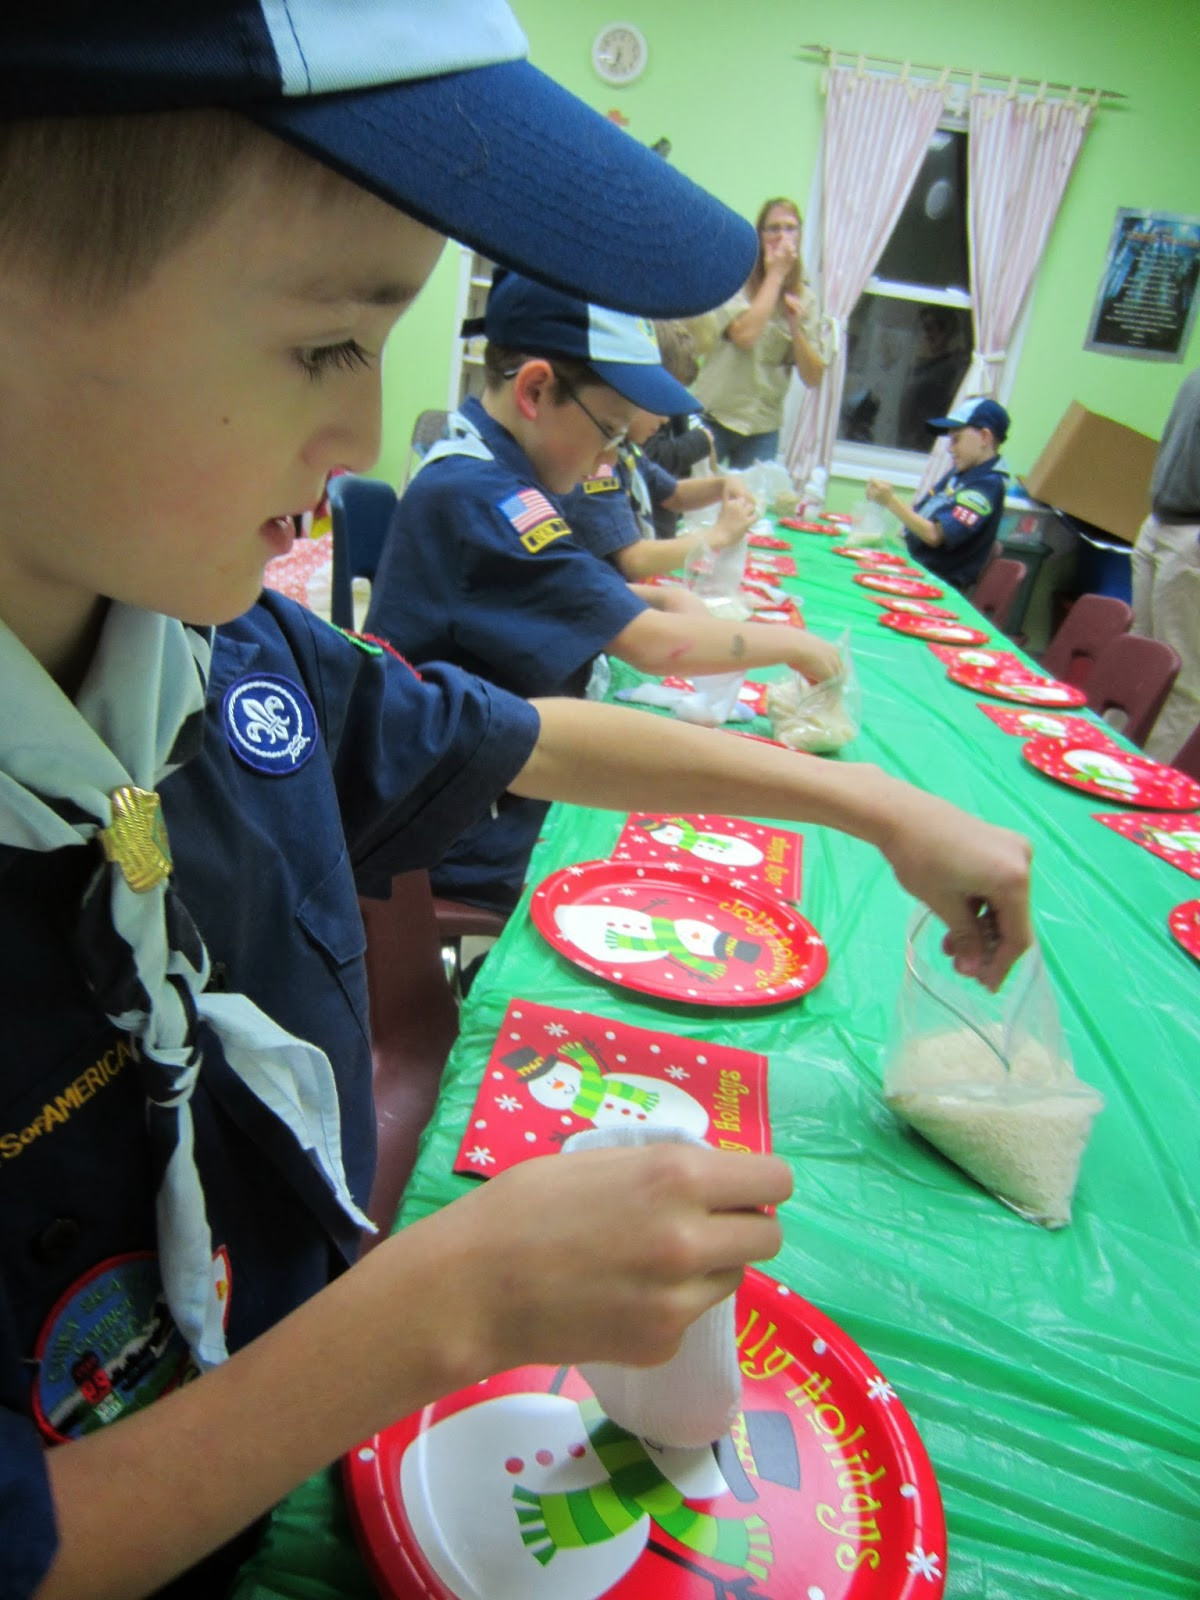 Cub Scout Christmas Party Ideas
 Sleepless in Babyland Cub Scout Den Christmas Party